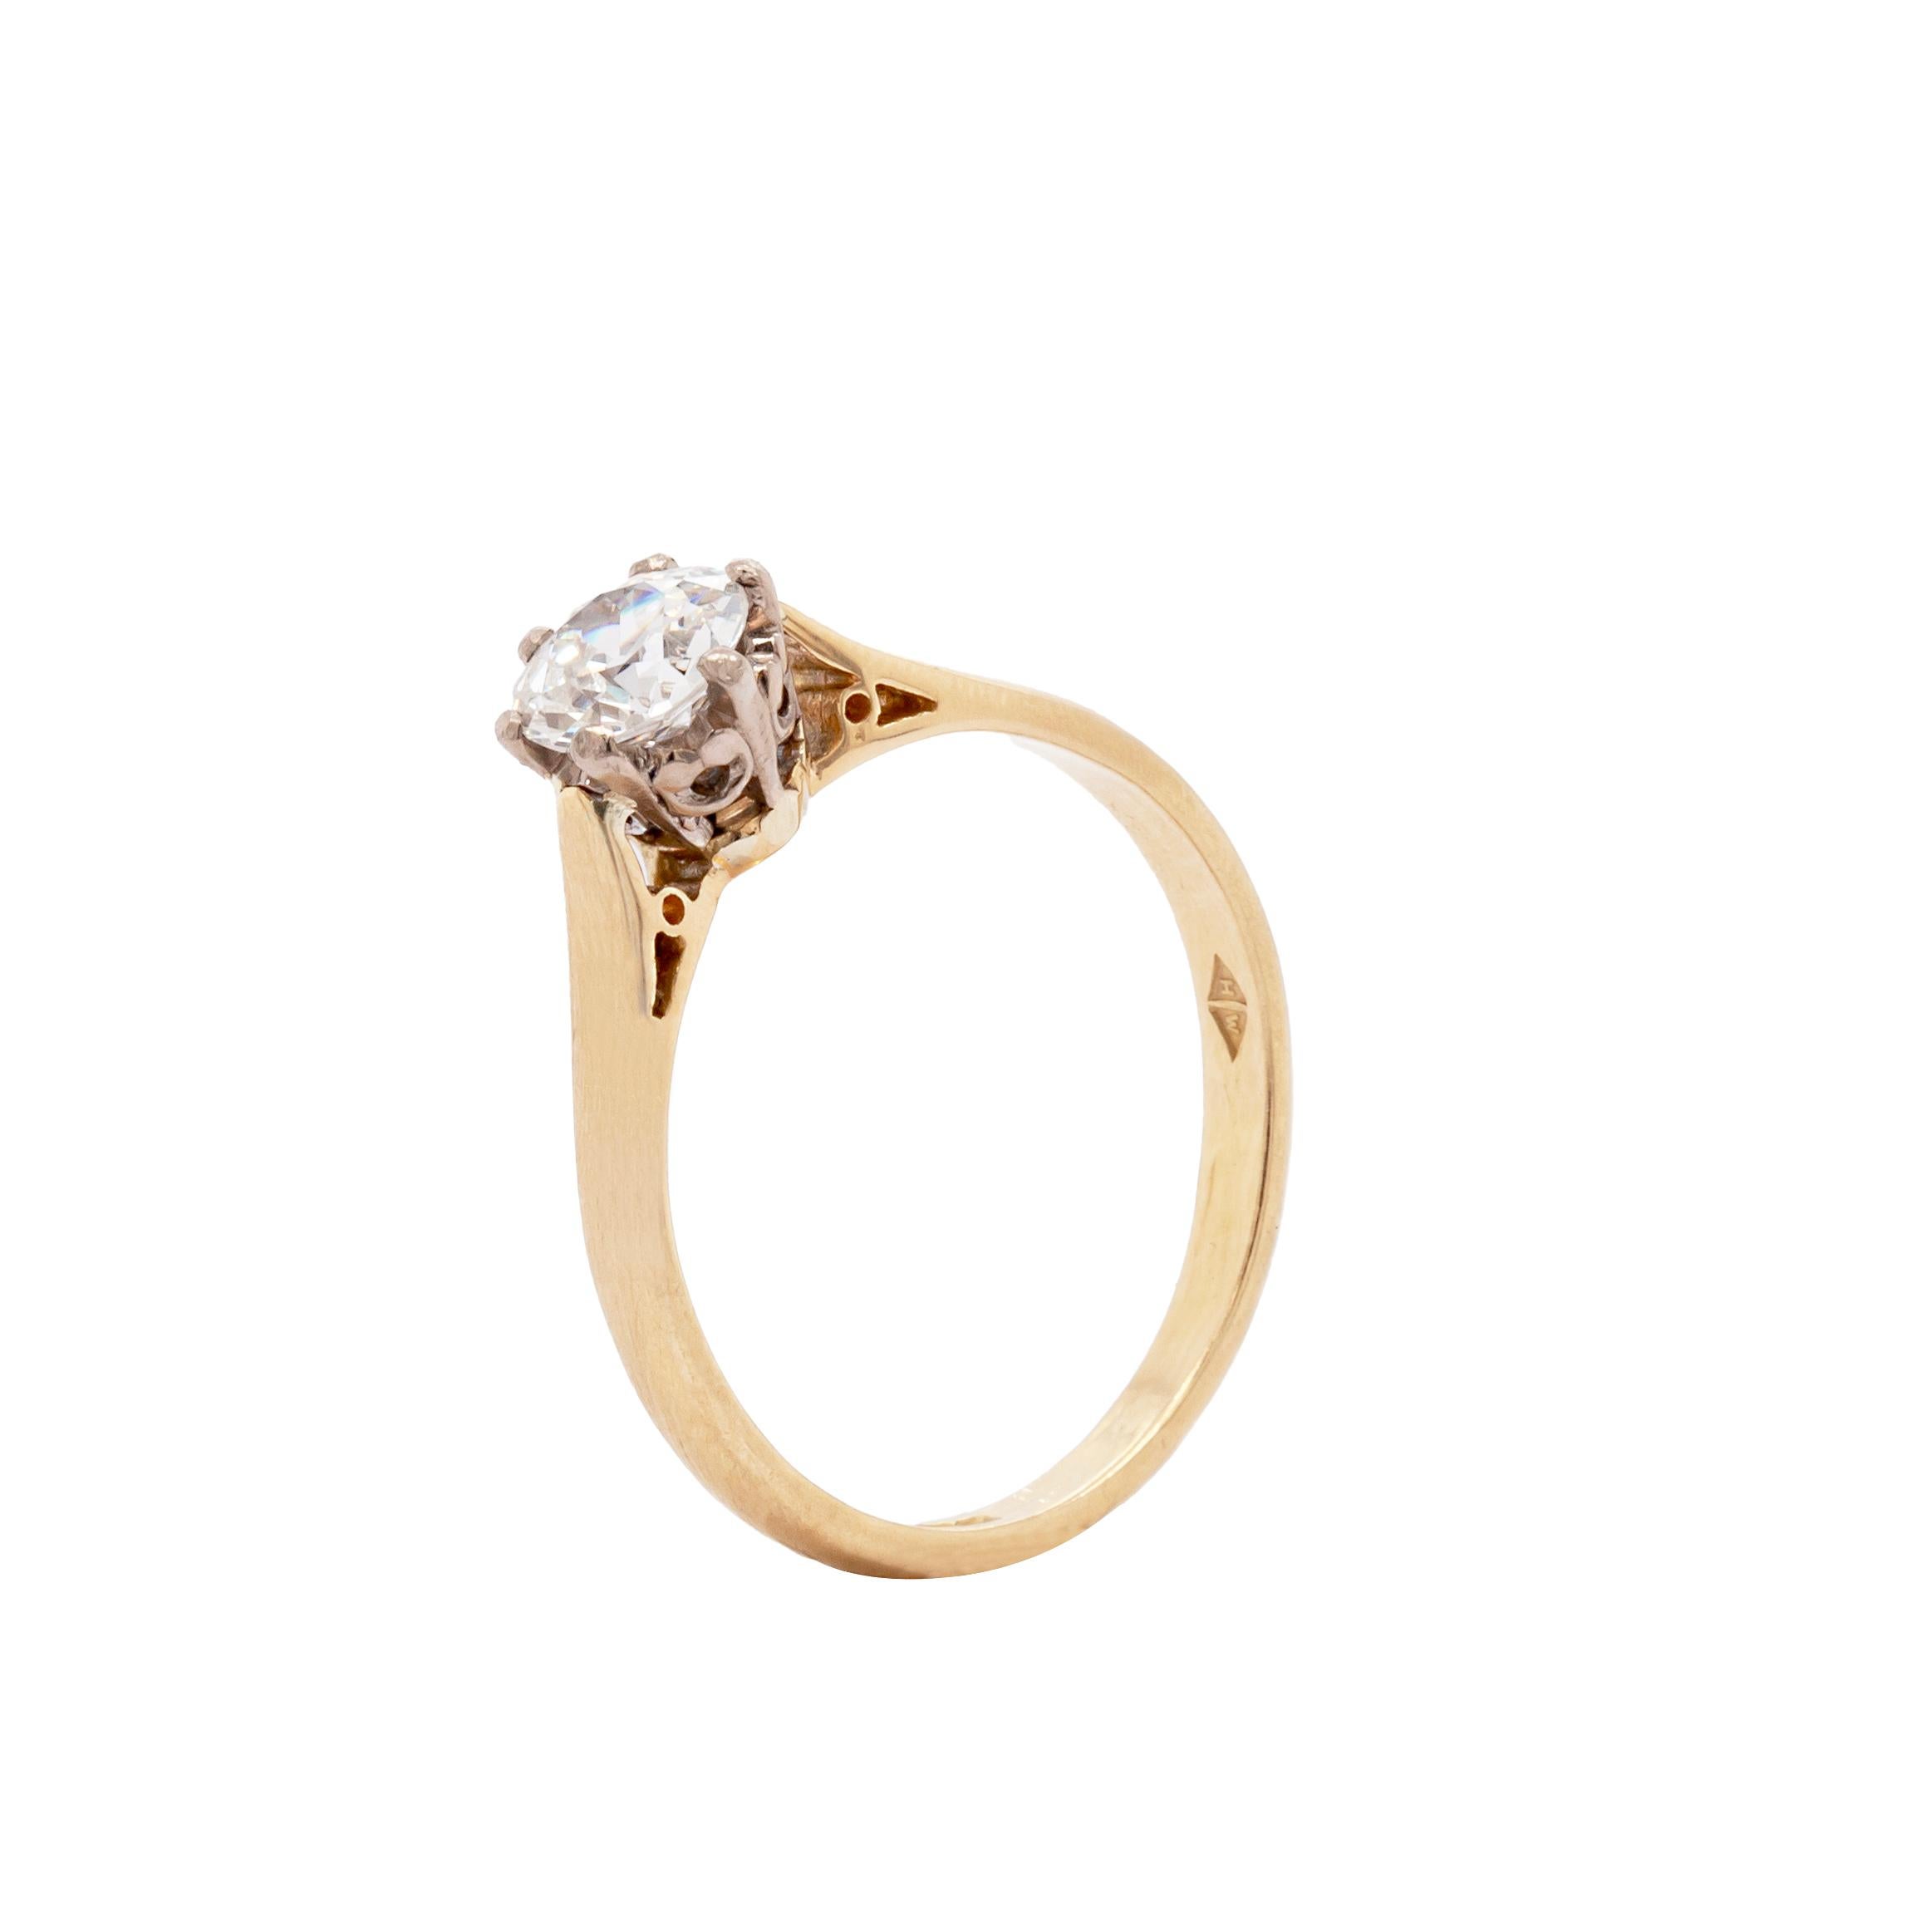 This is a gorgeous and timeless old mine cut single stone ring. The beautiful cushion-shaped diamond weighs a plentiful 0.79 carats and is set in a vintage 18ct yellow gold ring, finished with a white gold setting to perfectly complement the